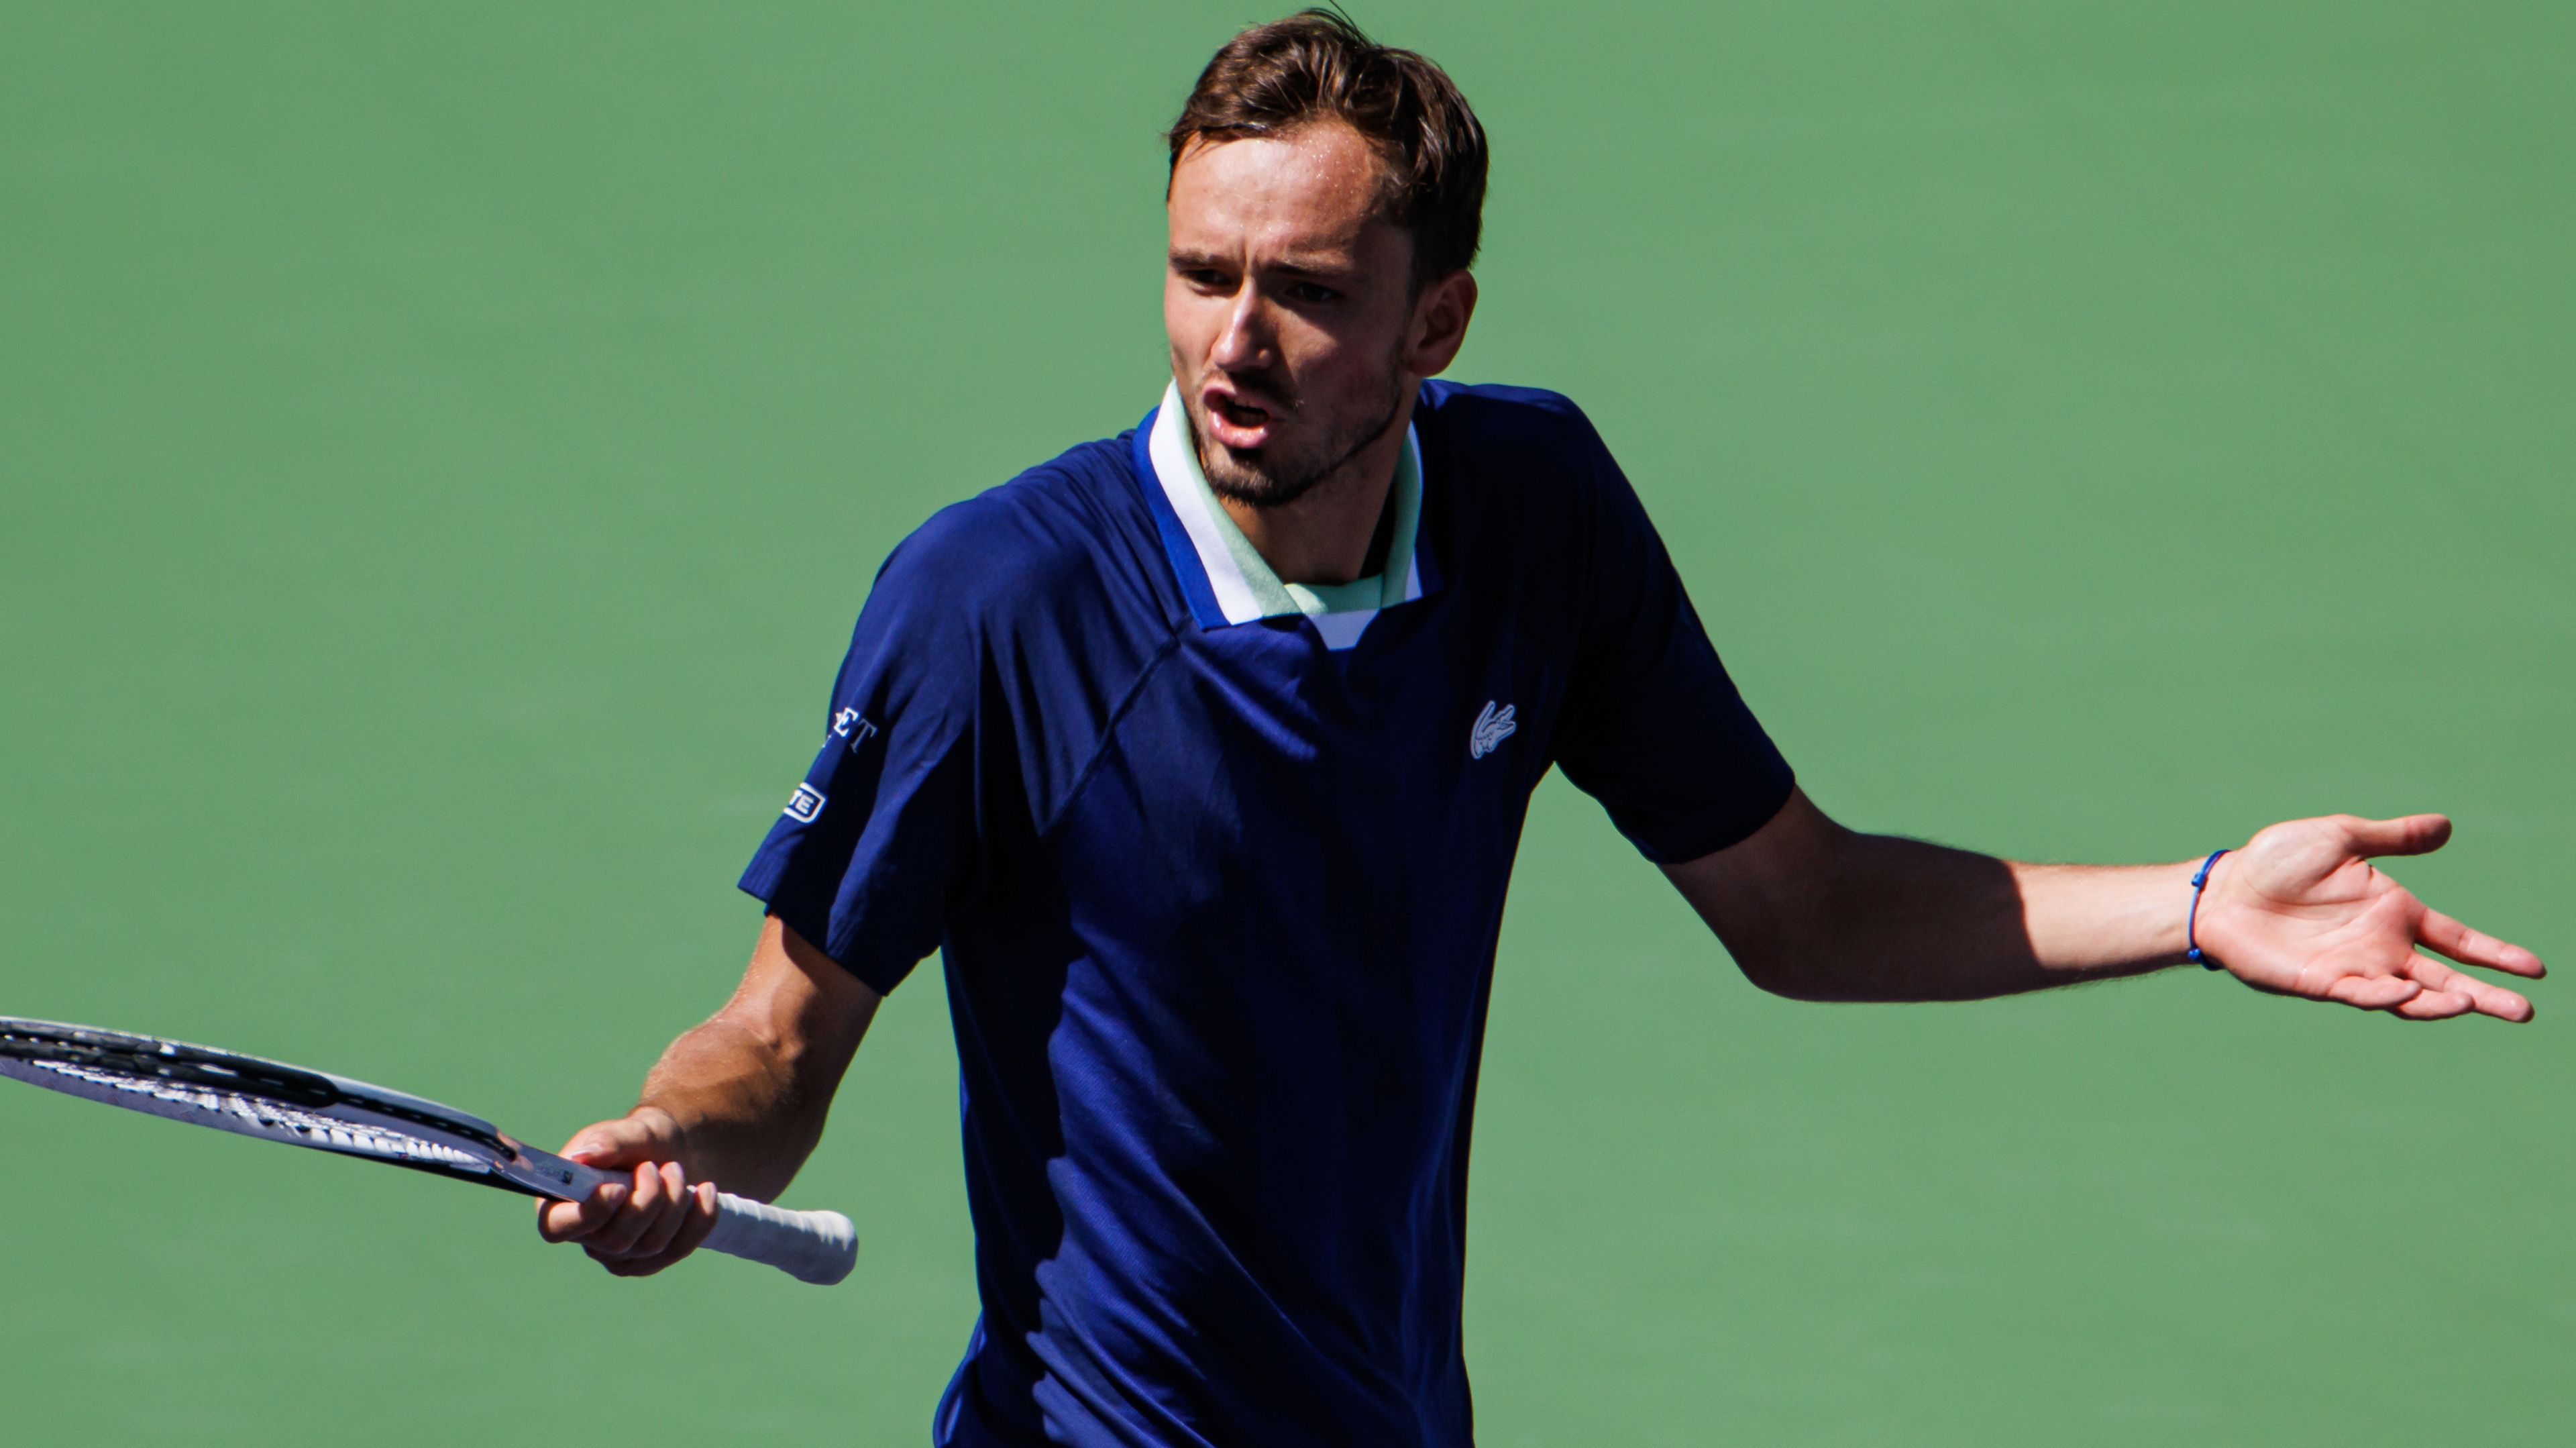 Daniil Medvedev reacts during his loss at the BNP Paribas Open at Indian Wells.